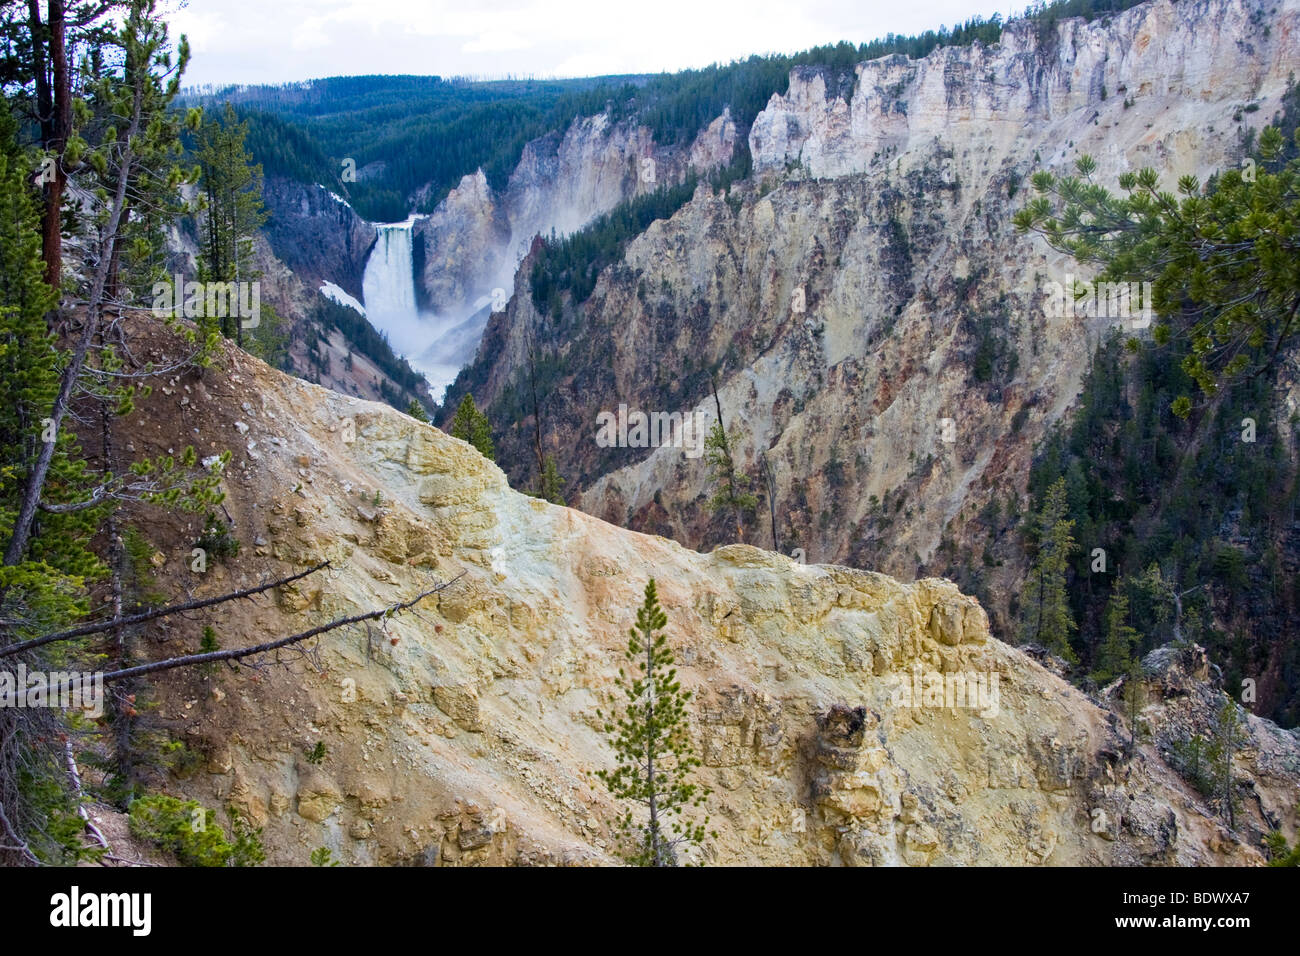 The Lower Falls of the Yellowstone River at the Grand Canyon, Wyoming, USA Stock Photo